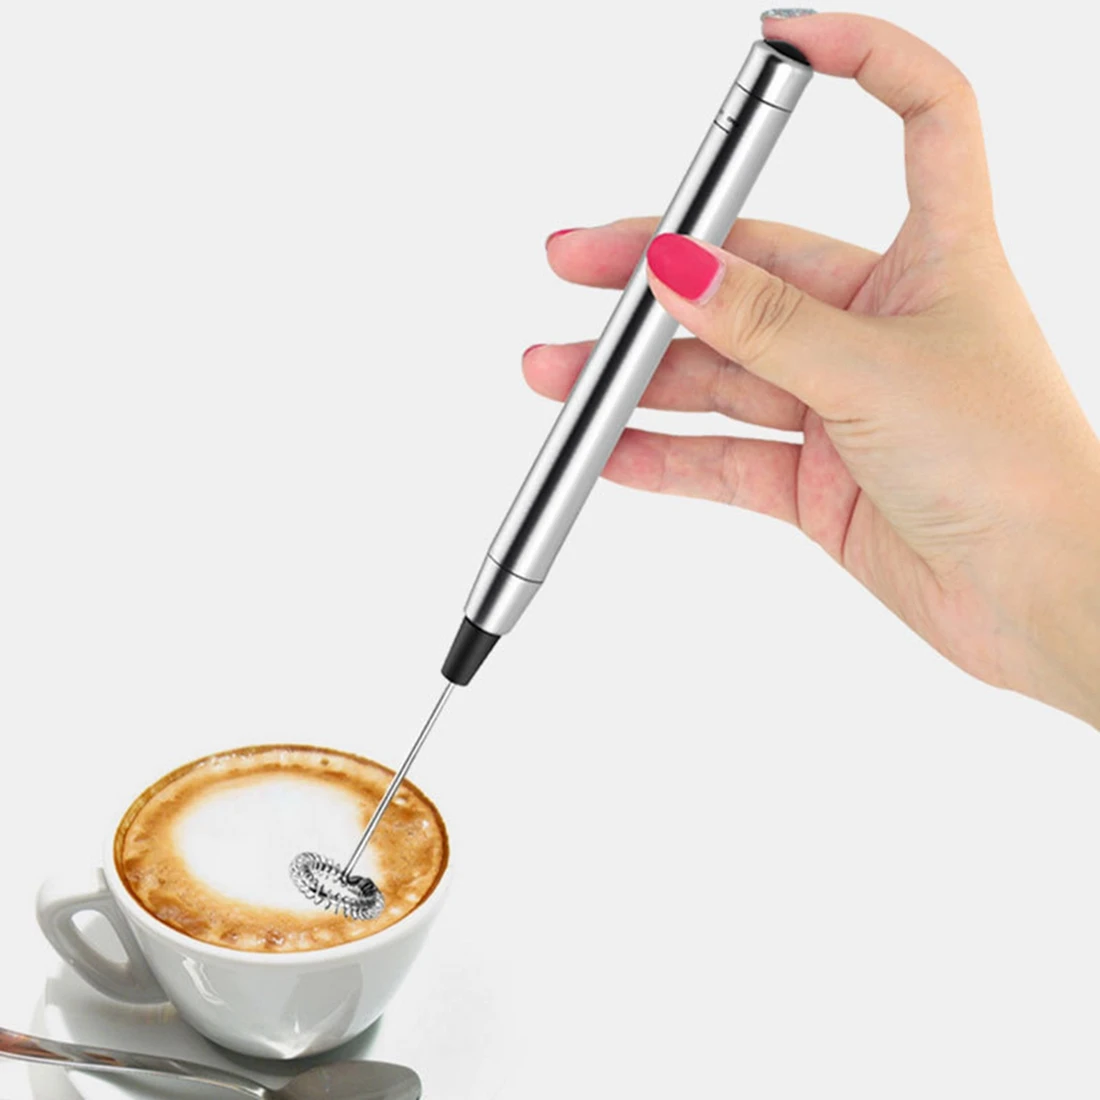 Handheld Food Mixers Electric Milk Frother Maker Portable Foam High Speeds  Coffee Frothing Wand 6 Stick Configuration EU - AliExpress